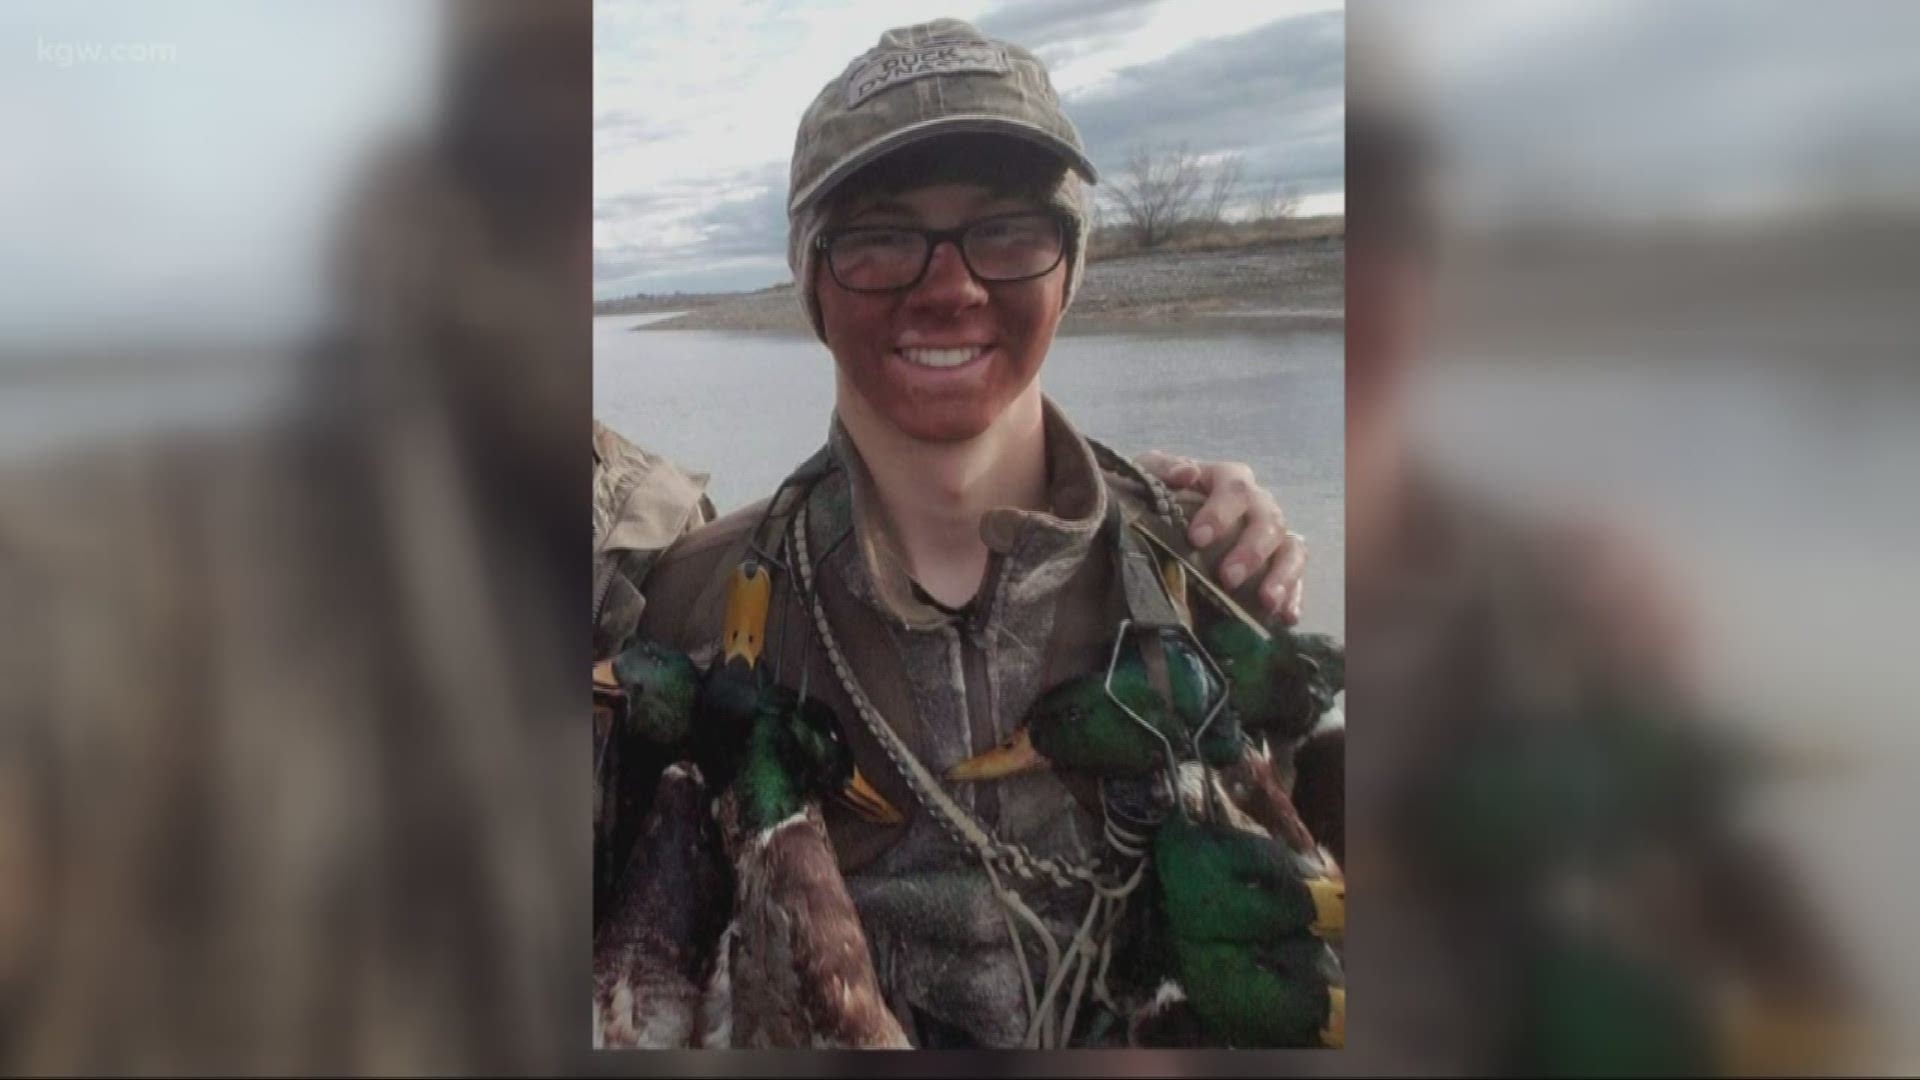 A 19-year-old duck hunter has gone missing in the area of Russian Island